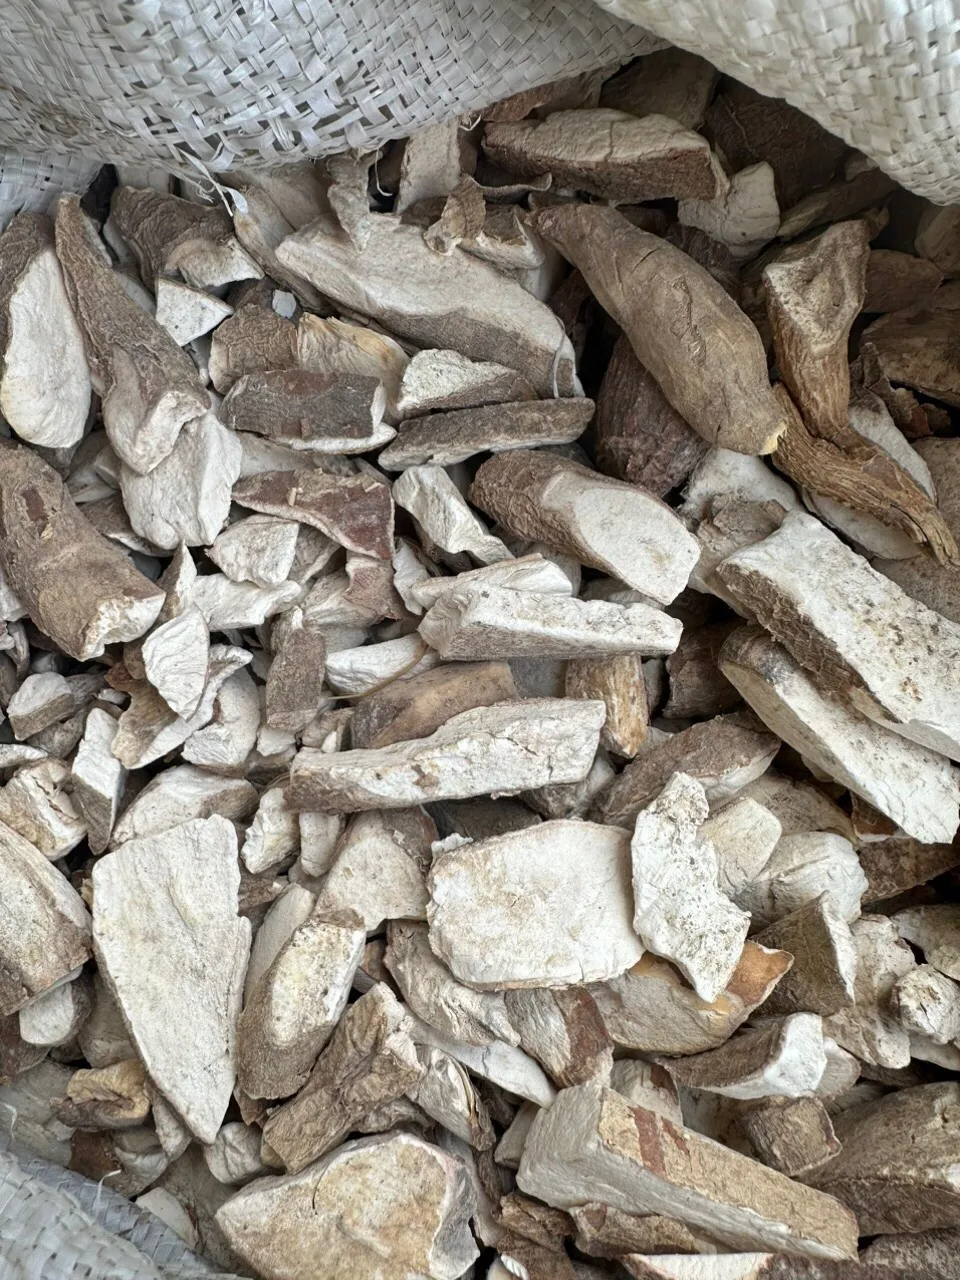 For Sale Dried Cassava Chips For Animal Feed Vietnam Sliced Cassava Tapioca Chips for Making Animal Food